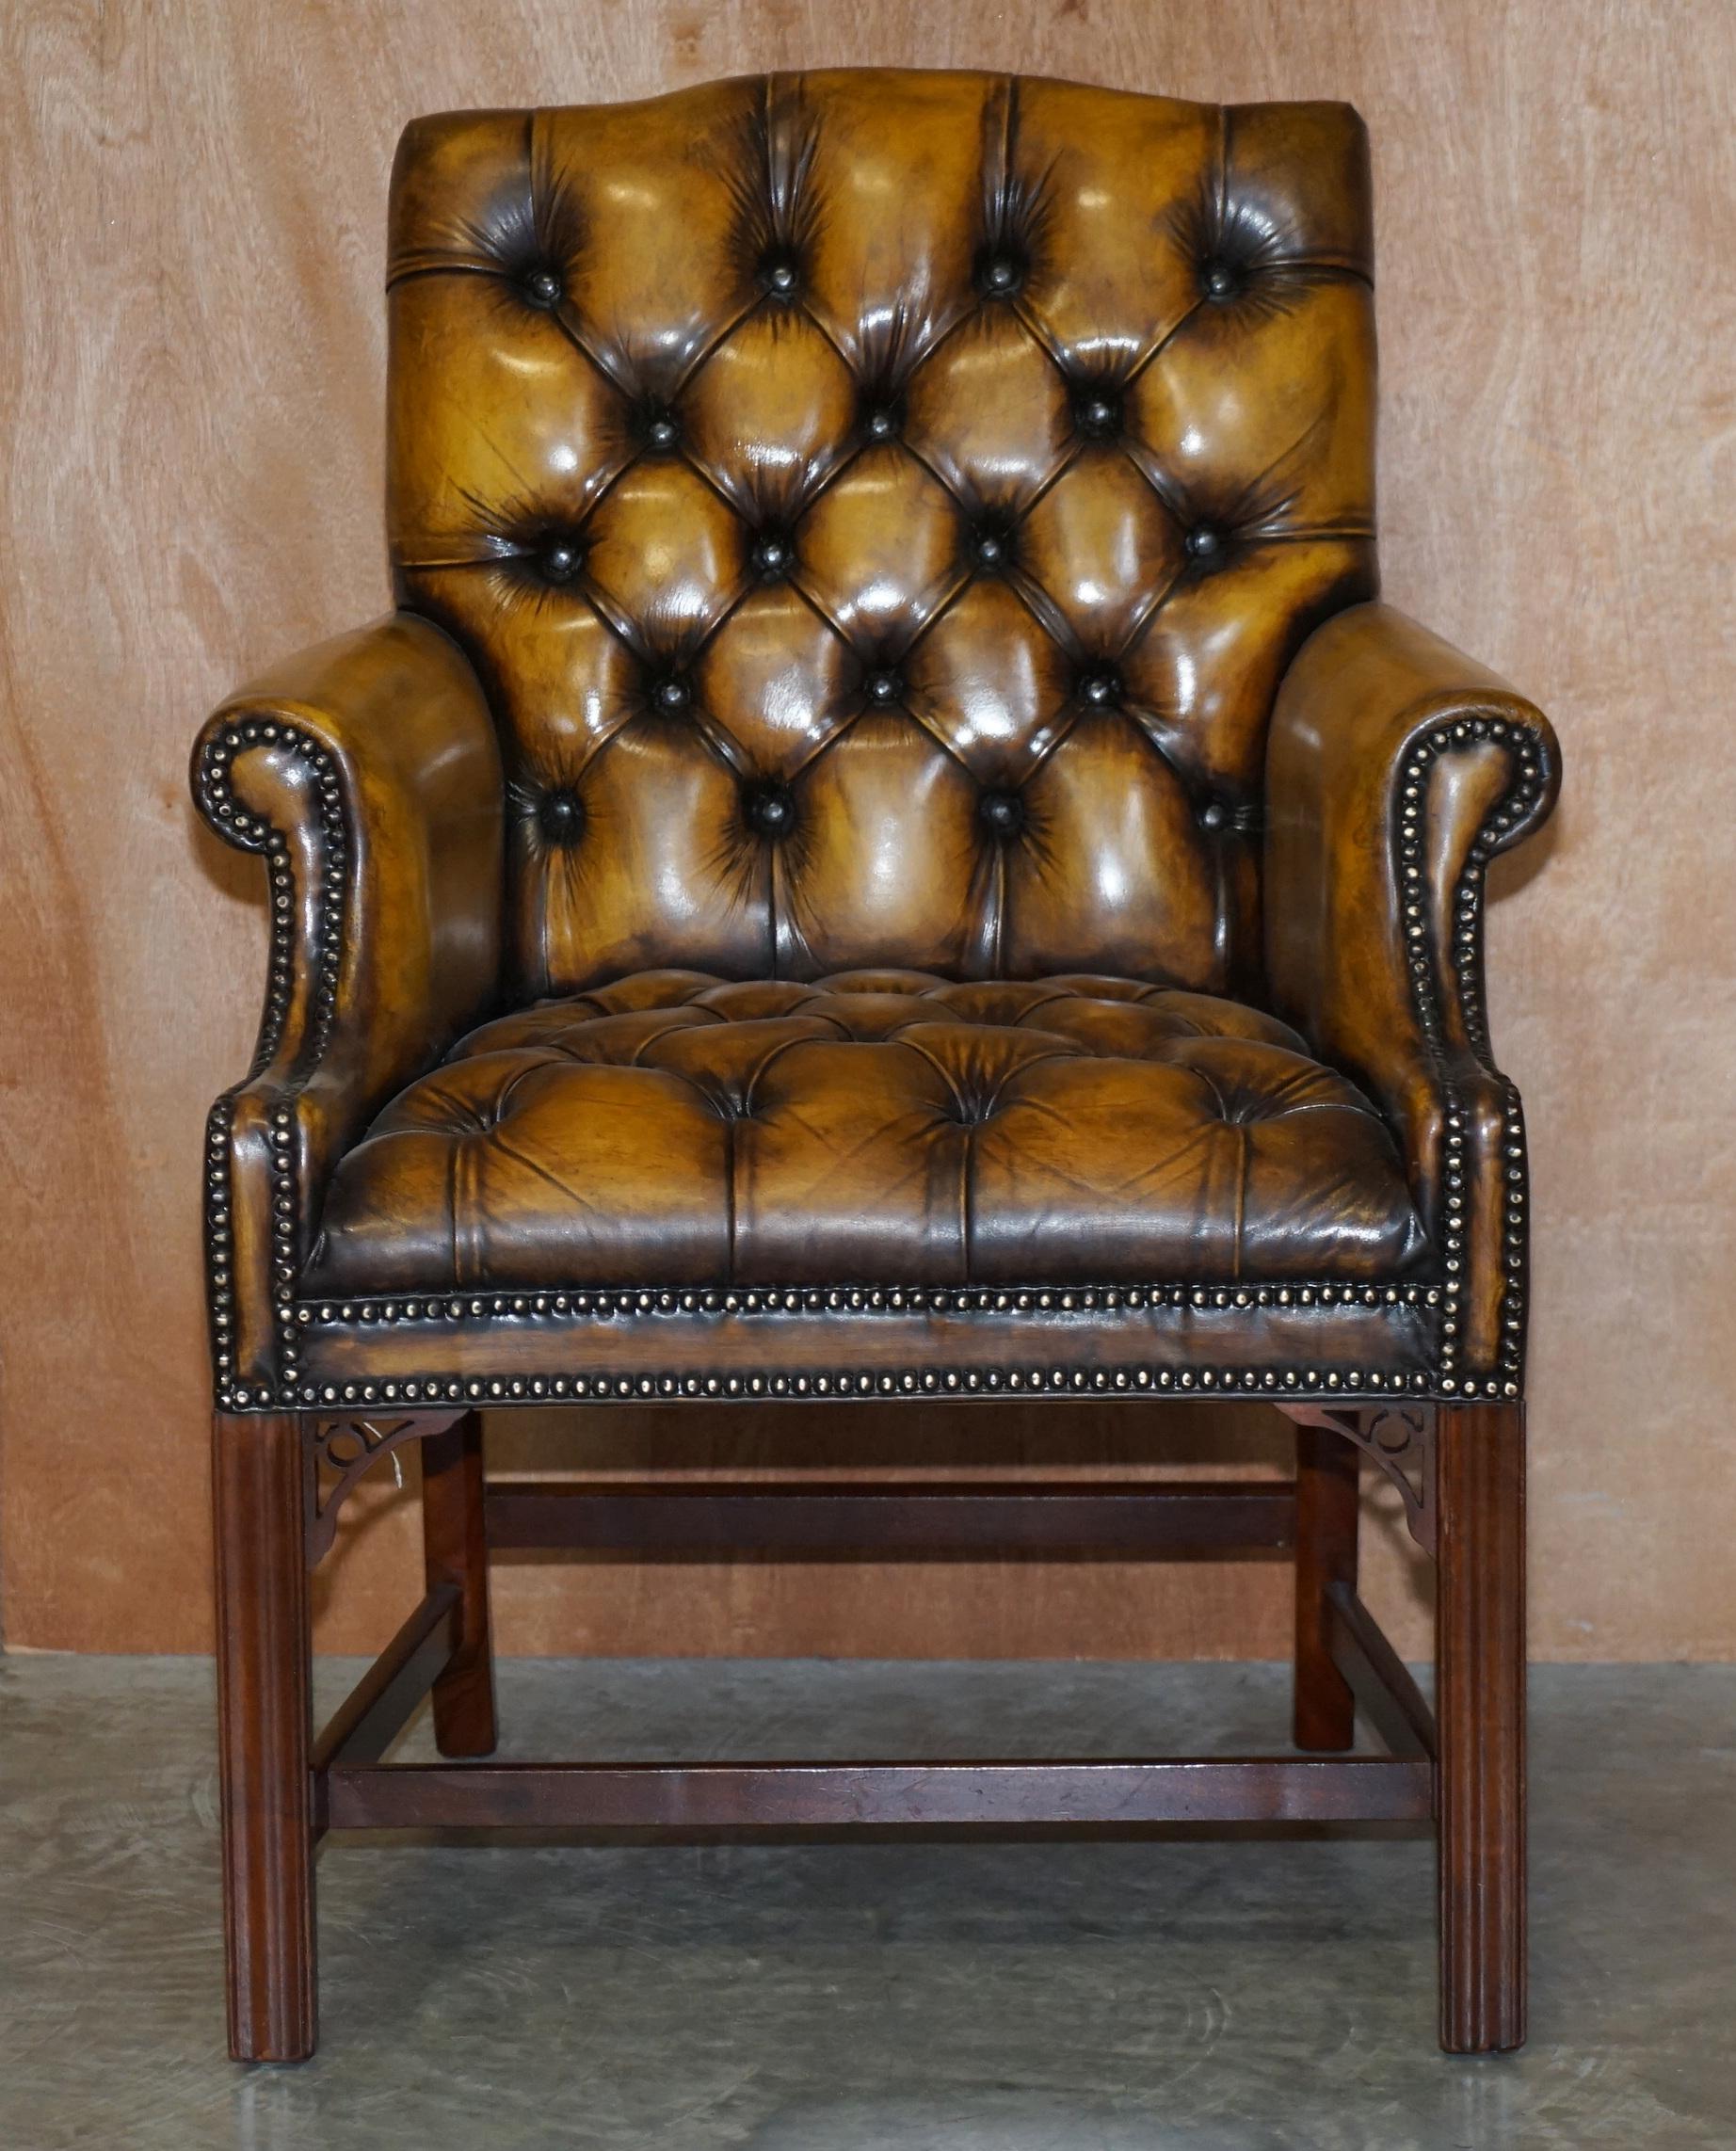 We are delighted to offer for sale this stunning suite of eight fully restored Chesterfield tufted armchairs with Thomas Chippendale style fret work carved legs

These chairs are a very rare find, they are made in the traditional English manor,